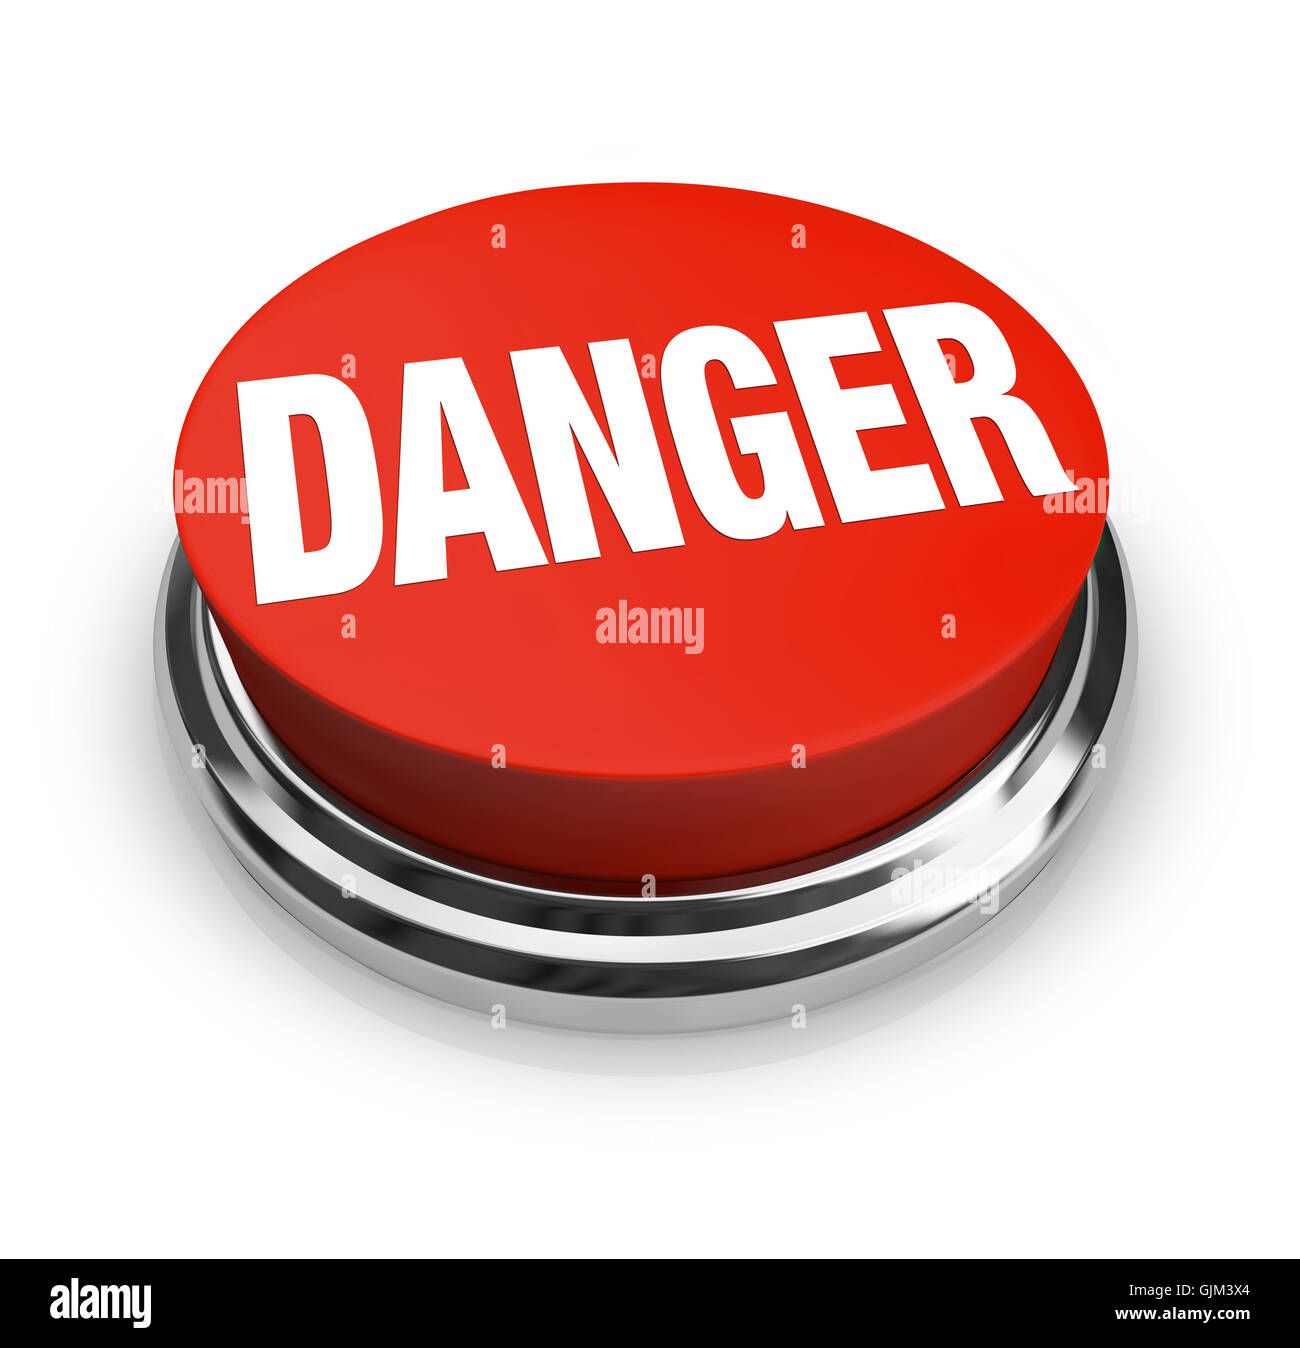 Danger Word on Round Red Button - Use Caution Be Alert Stock Photo